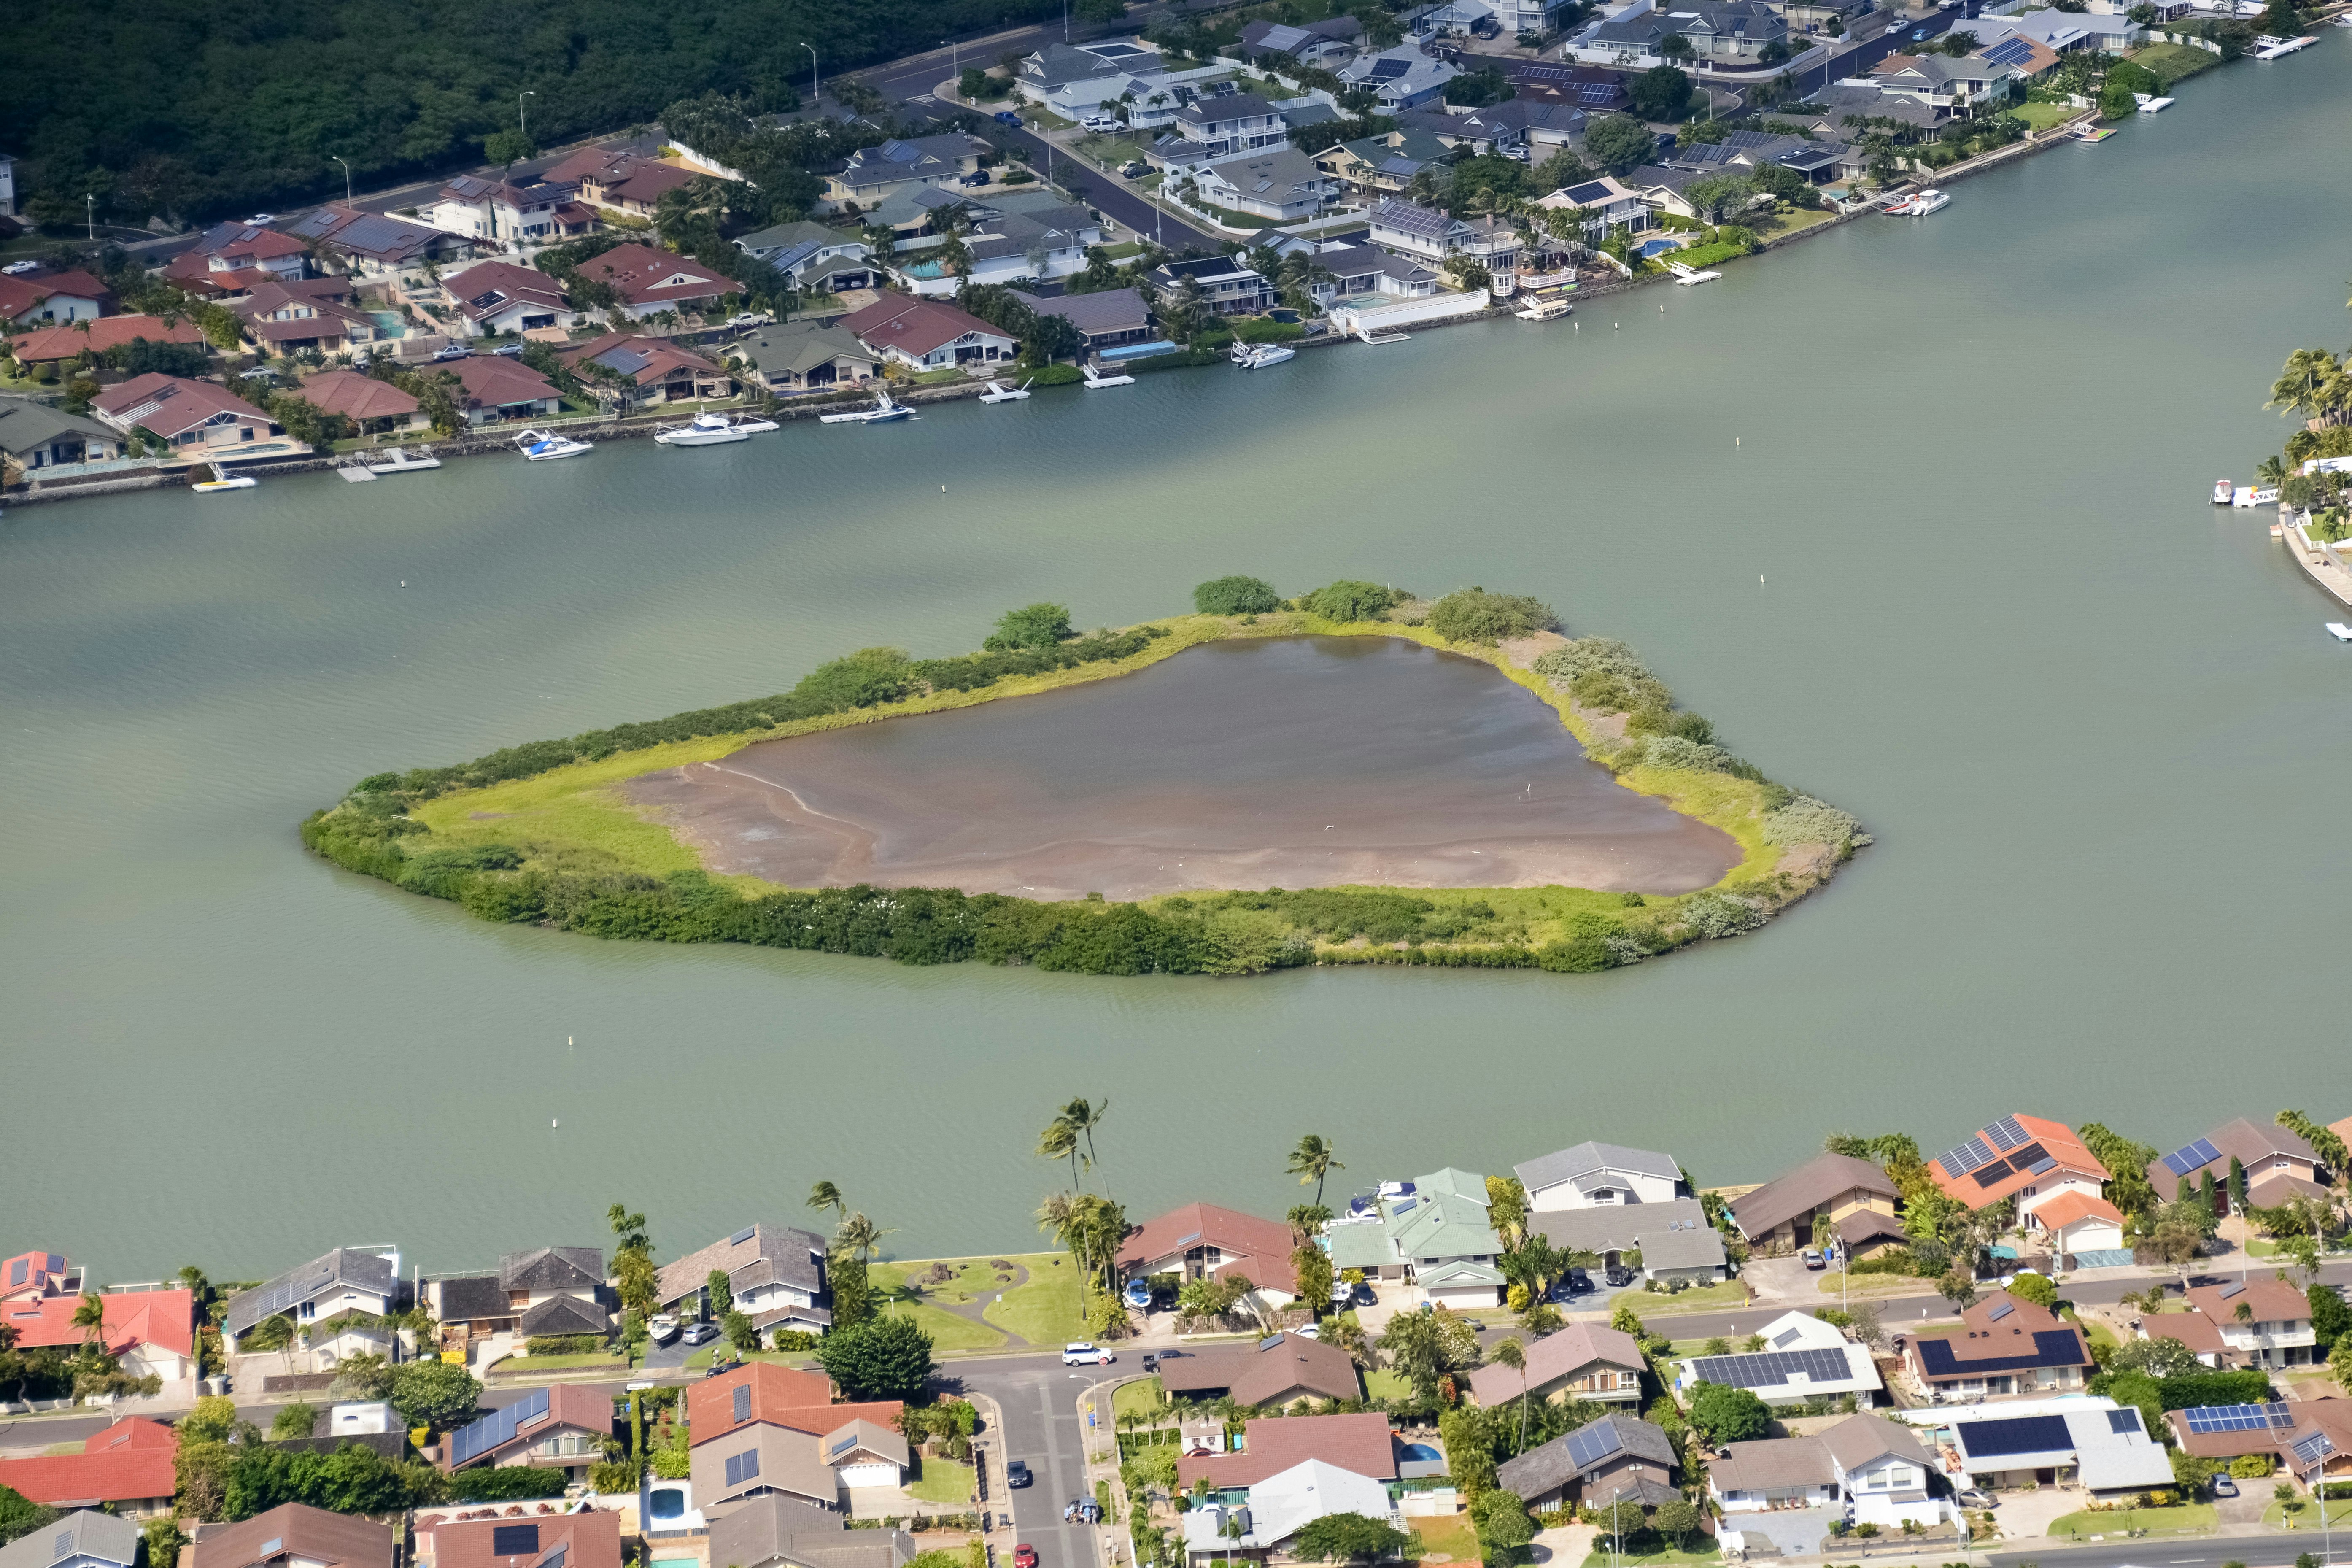 aerial view of green and brown field near body of water during daytime